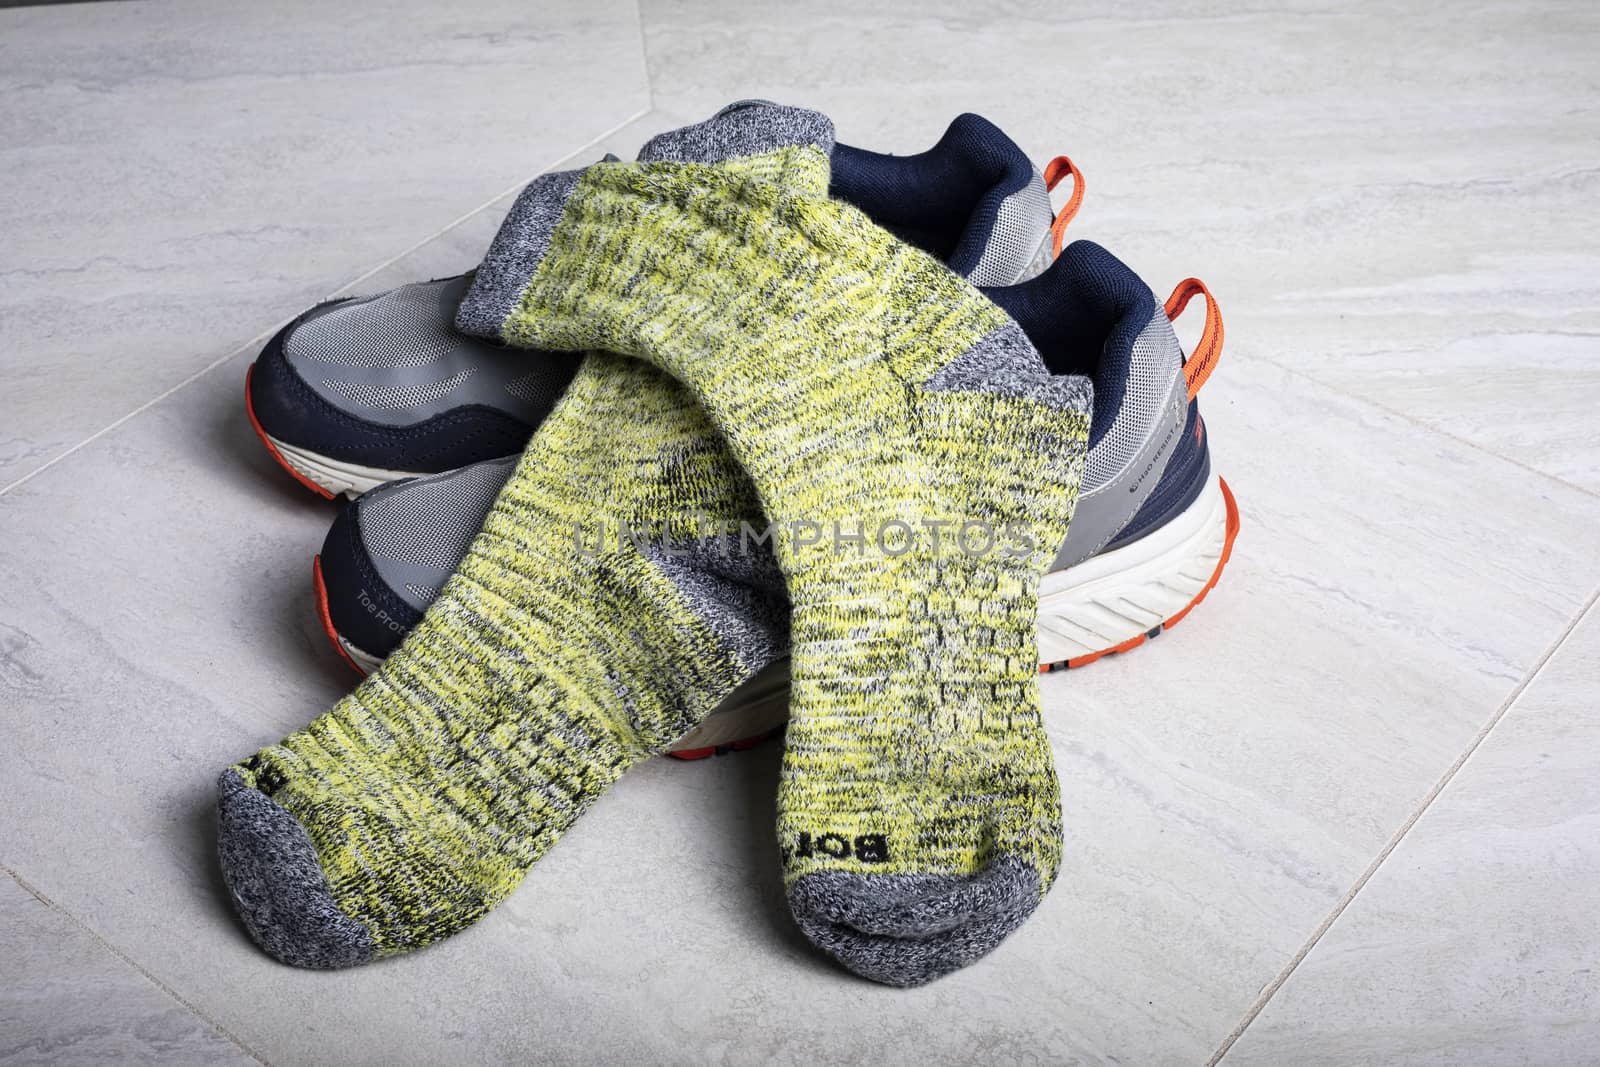 Yellow Bombas calf socks shown with athletic shoes. Honeycomb weave of arch is visible.